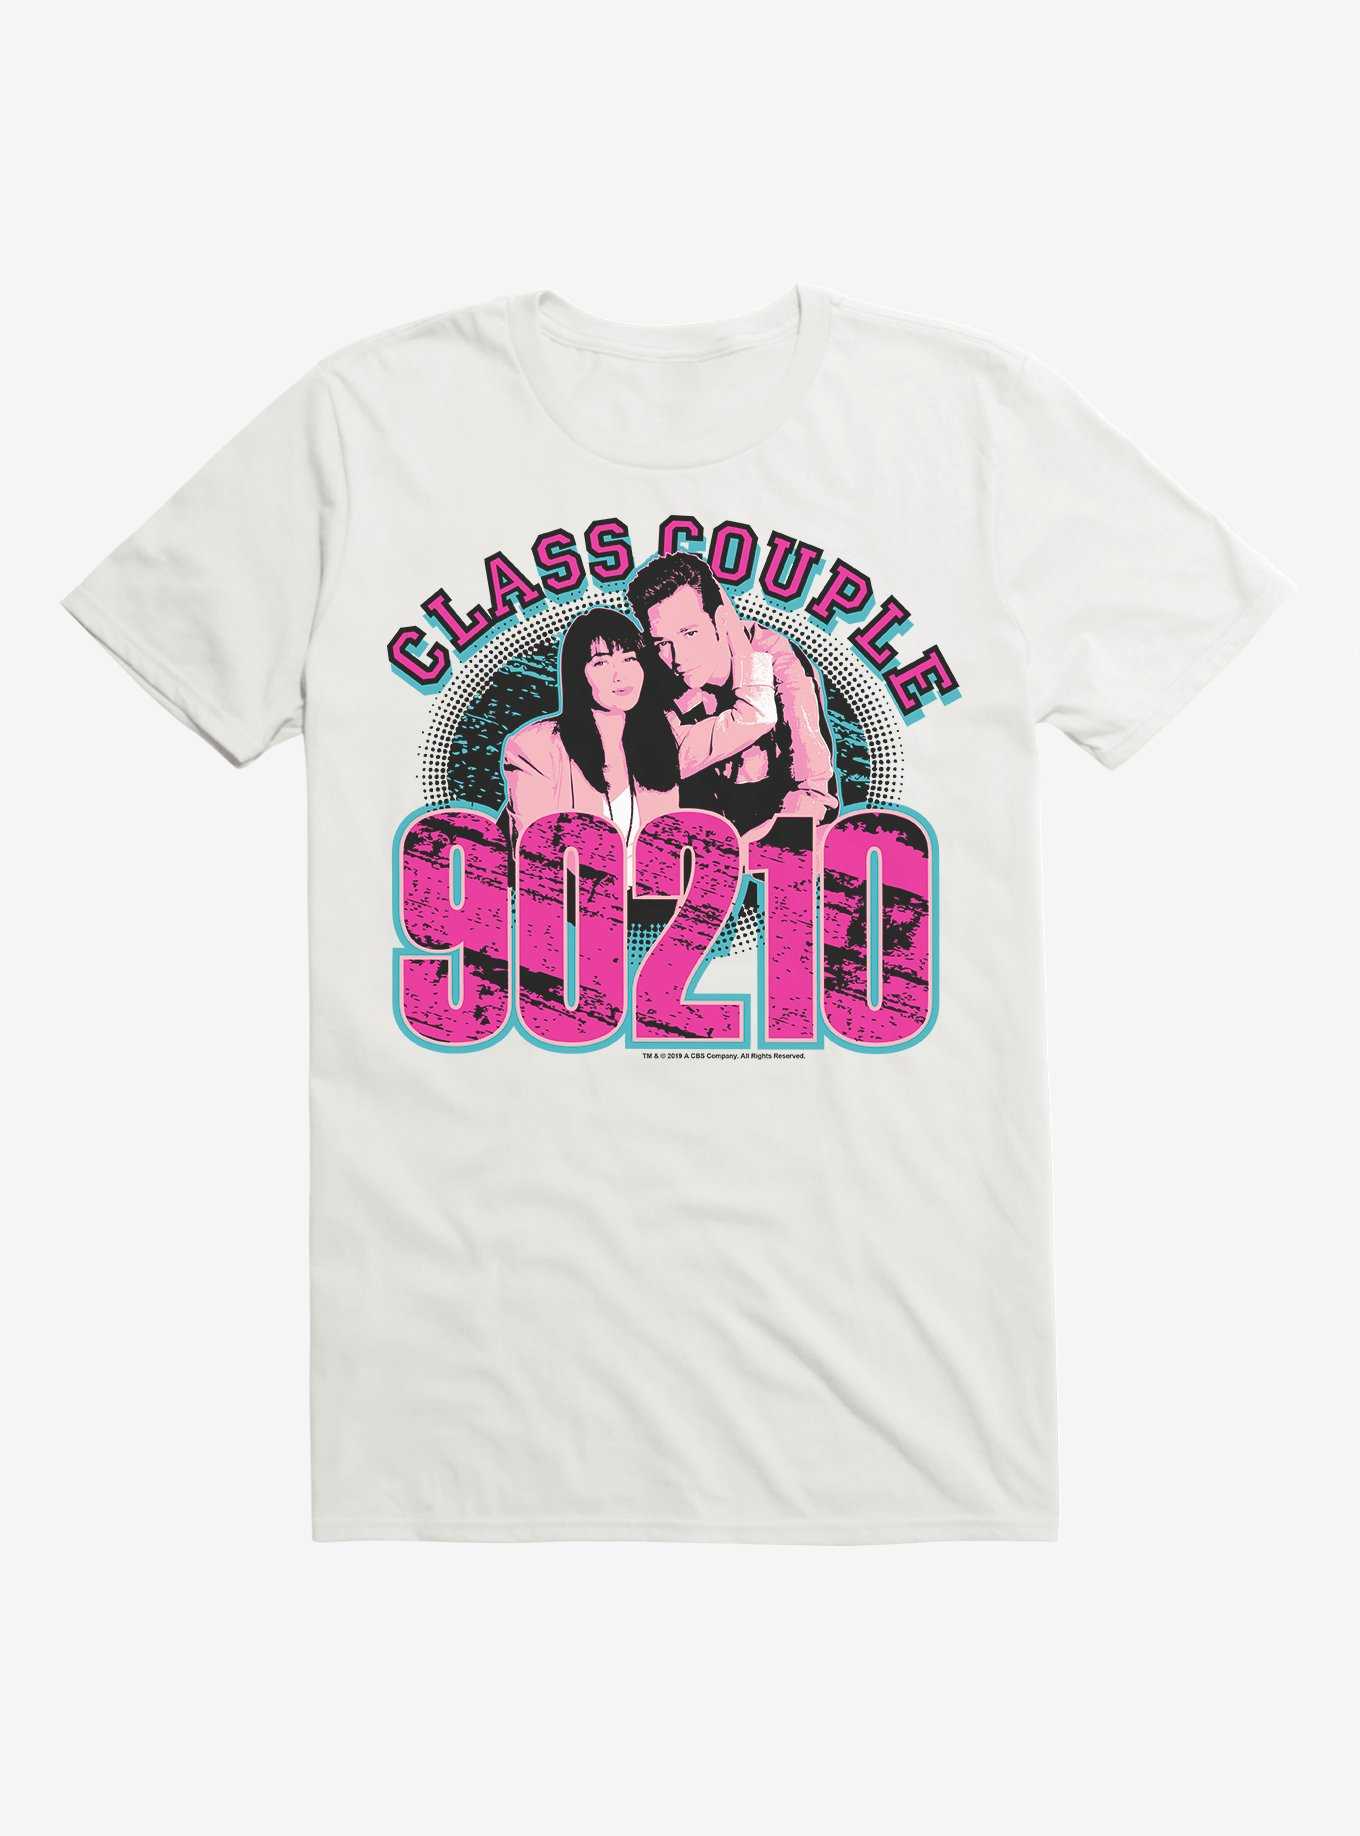 OFFICIAL & Hot Topic Merch T-Shirts | 90210